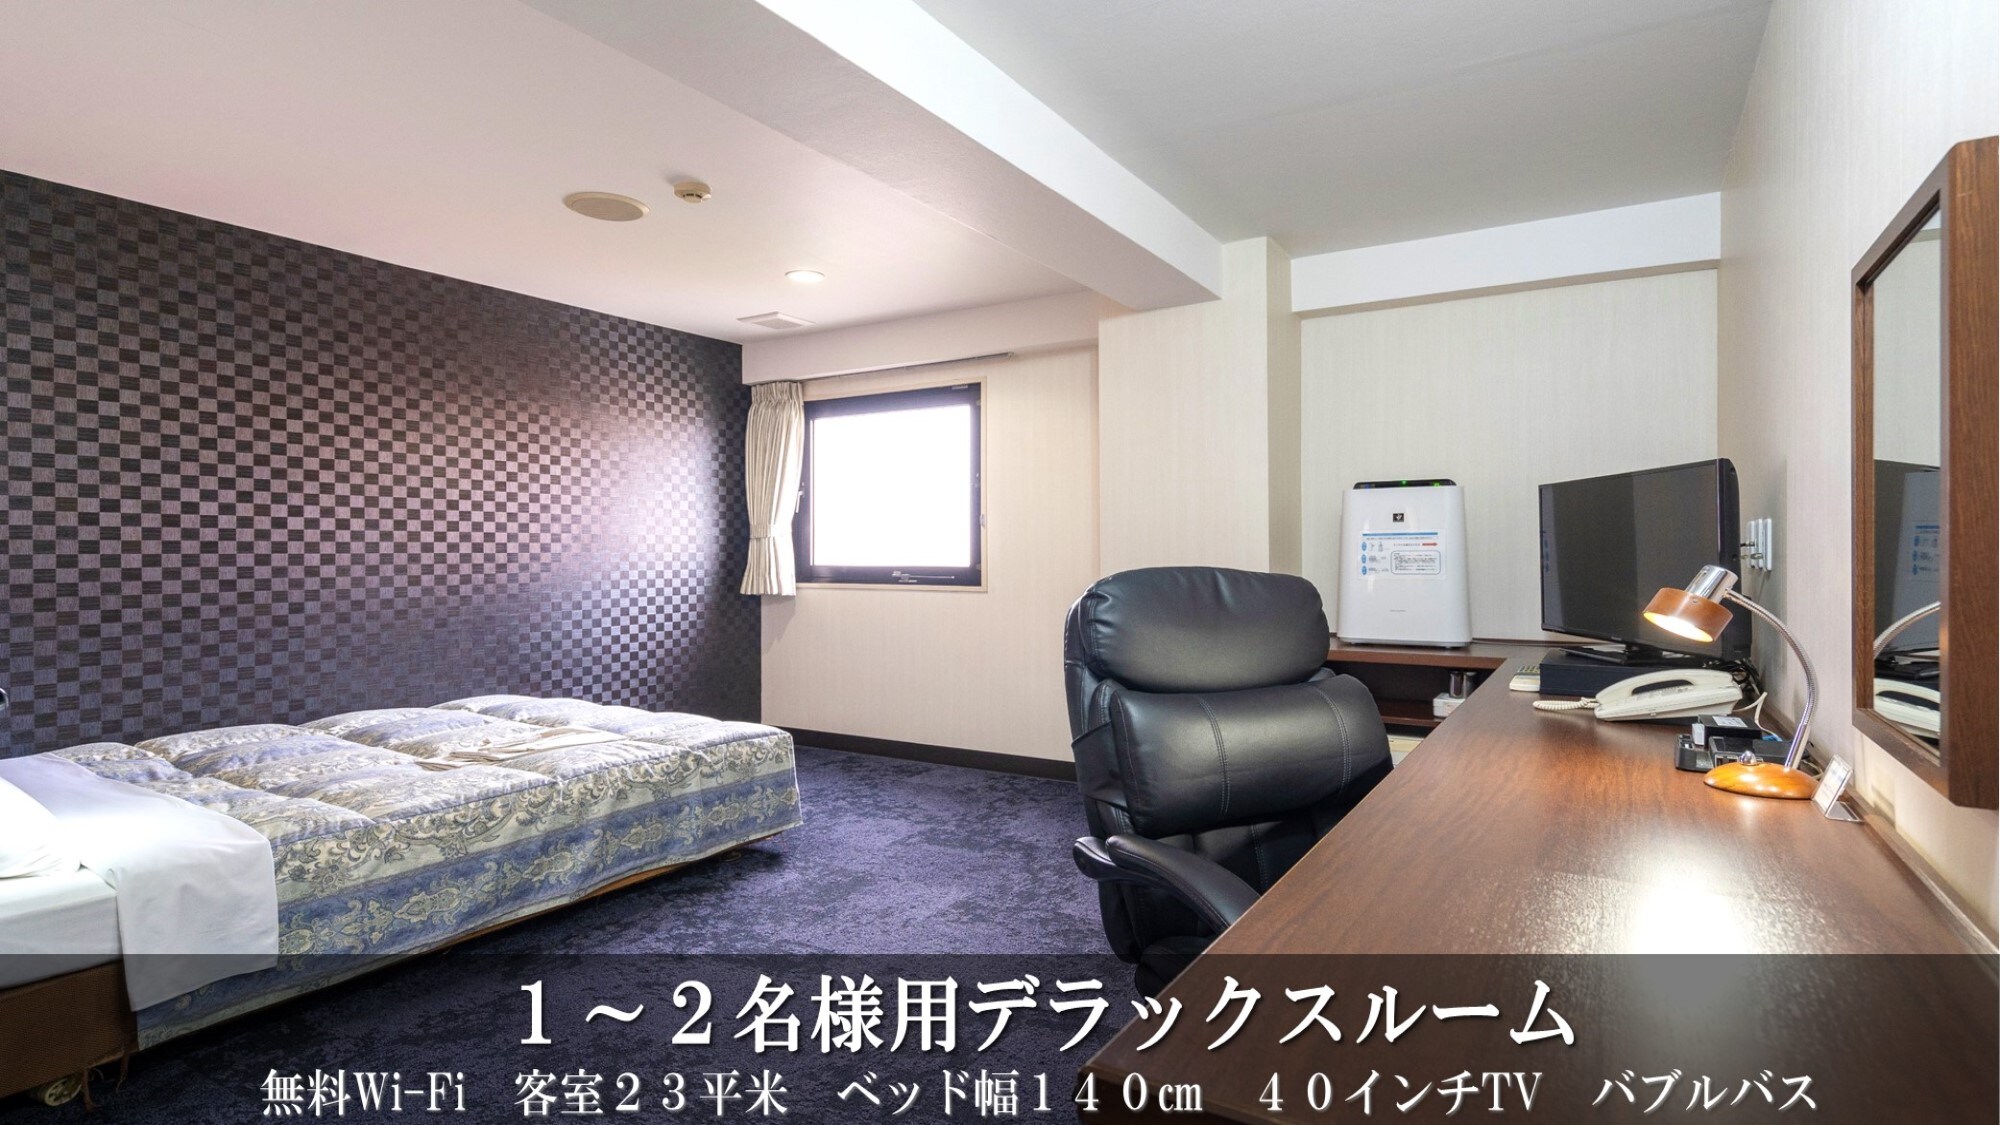 Deluxe room (23 square meters for 1-2 people, bed width 140 cm, non-smoking)